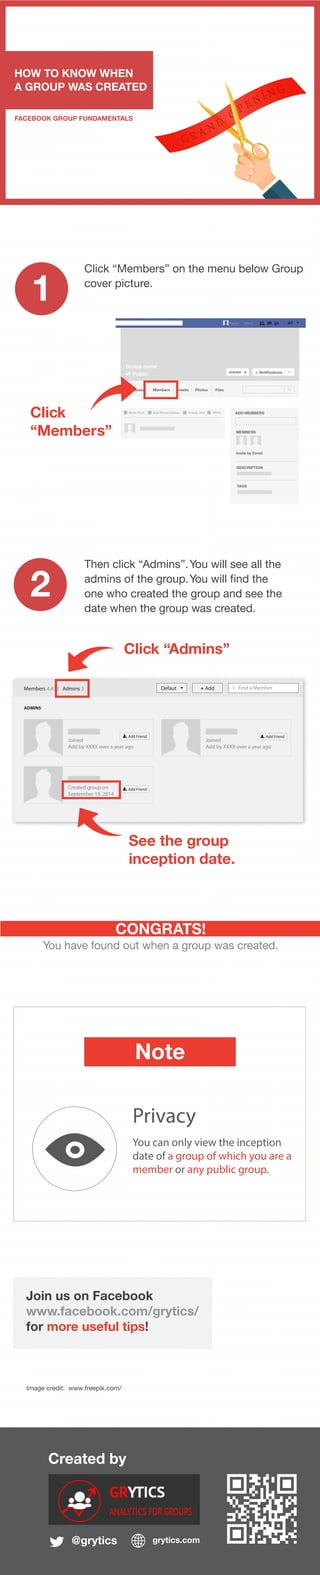 Created by
@grytics grytics.com
Join us on Facebook
www.facebook.com/grytics/
for more useful tips!
HOW TO KNOW WHEN
A GROUP WAS CREATED
FACEBOOK GROUP FUNDAMENTALS
1
2
CONGRATS!
You have found out when a group was created.
Image credit: www.freepik.com/
Click “Members” on the menu below Group
cover picture.
Note
Privacy
You can only view the inception
date of a group of which you are a
member or any public group.
Click
“Members”
Group nameName Home
Group name
Public Joined Notifications ...
Discussion Members Events Photos Files
Write Post Add Photo/Videso Create Poll More ADD MEMBERS
MEMBERS
Invite by Email
DESCRIPTION
TAGS
Then click “Admins”.You will see all the
admins of the group.You will find the
one who created the group and see the
date when the group was created.
Members 4,432 Admins 3 Defaut + Add Find a Member
ADMINS
Add FriendCreated group on
September 19, 2014
Joined
Add by XXXX over a year ago
Add Friend
Joined
Add by XXXX over a year ago
Add Friend
Click “Admins”
See the group
inception date.
 